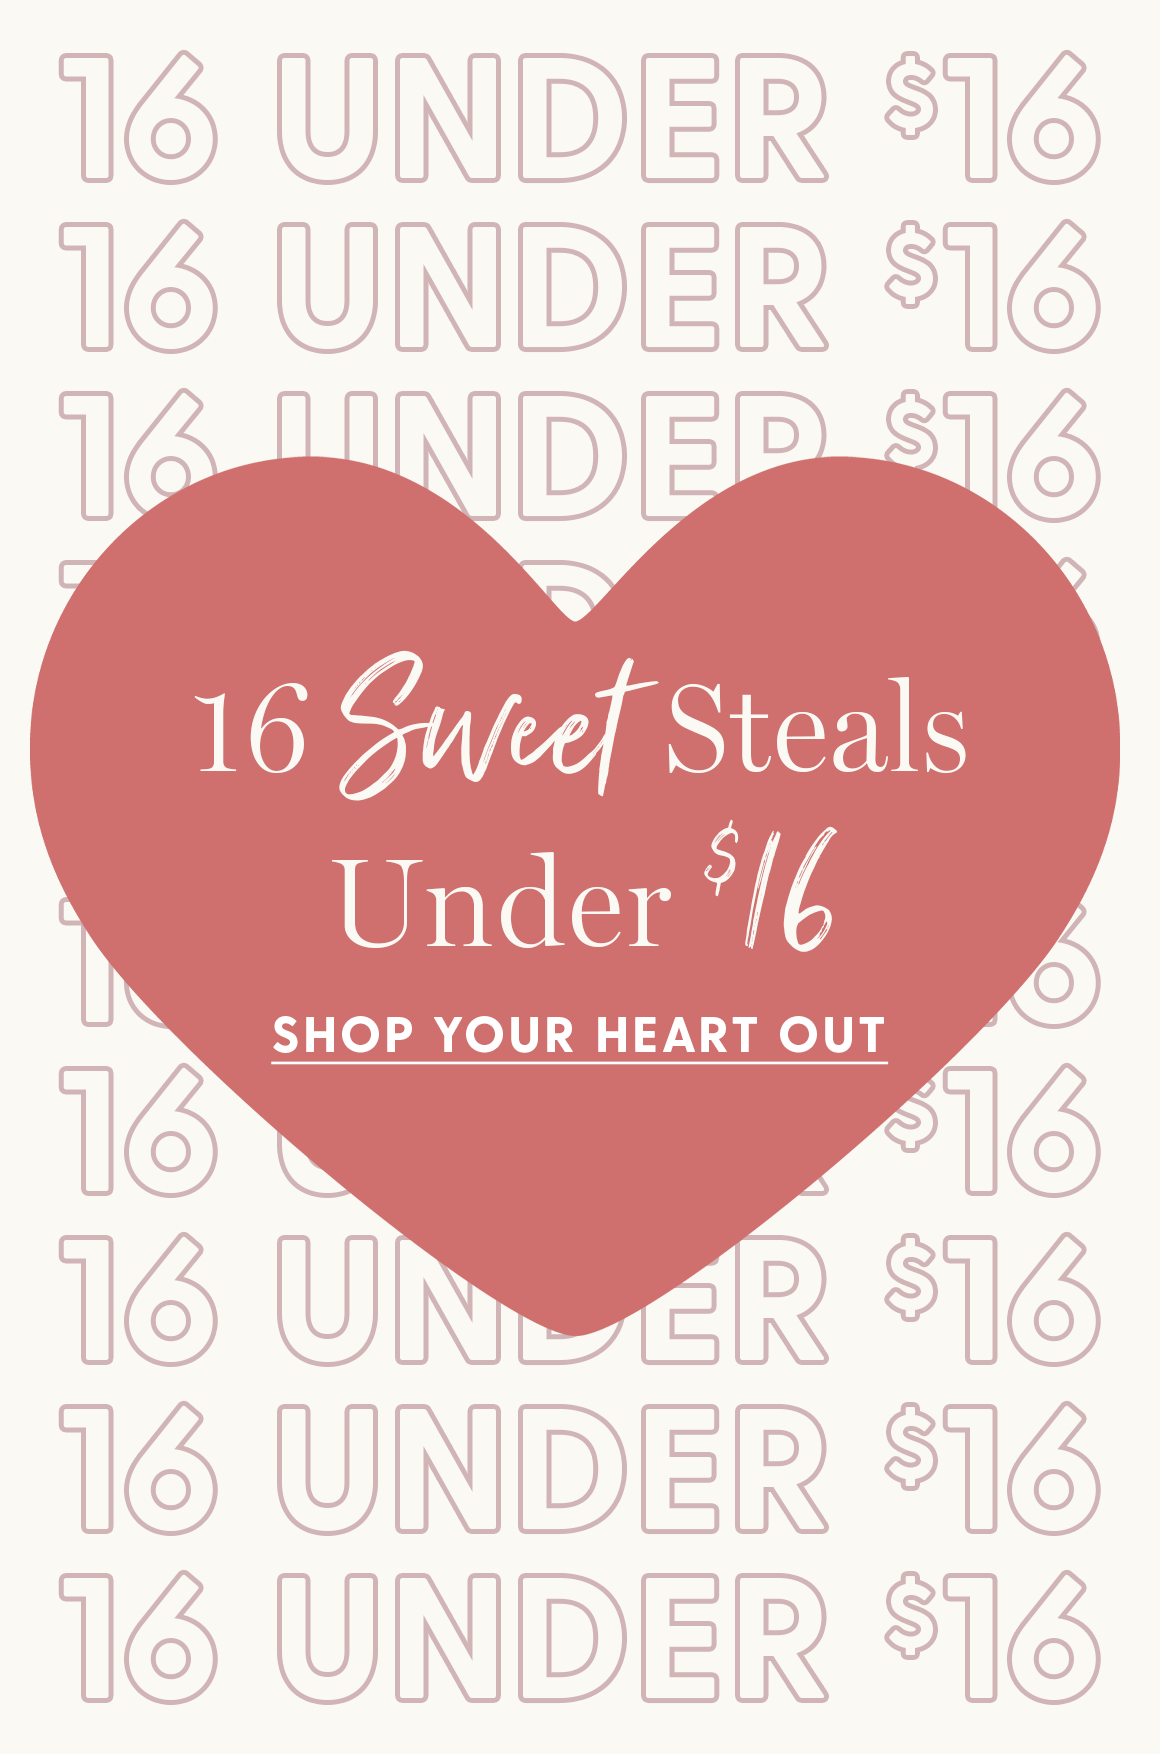 16 UNDER $16. 16 Sweet Steals Under $16. SHOP YOUR HEART OUT.